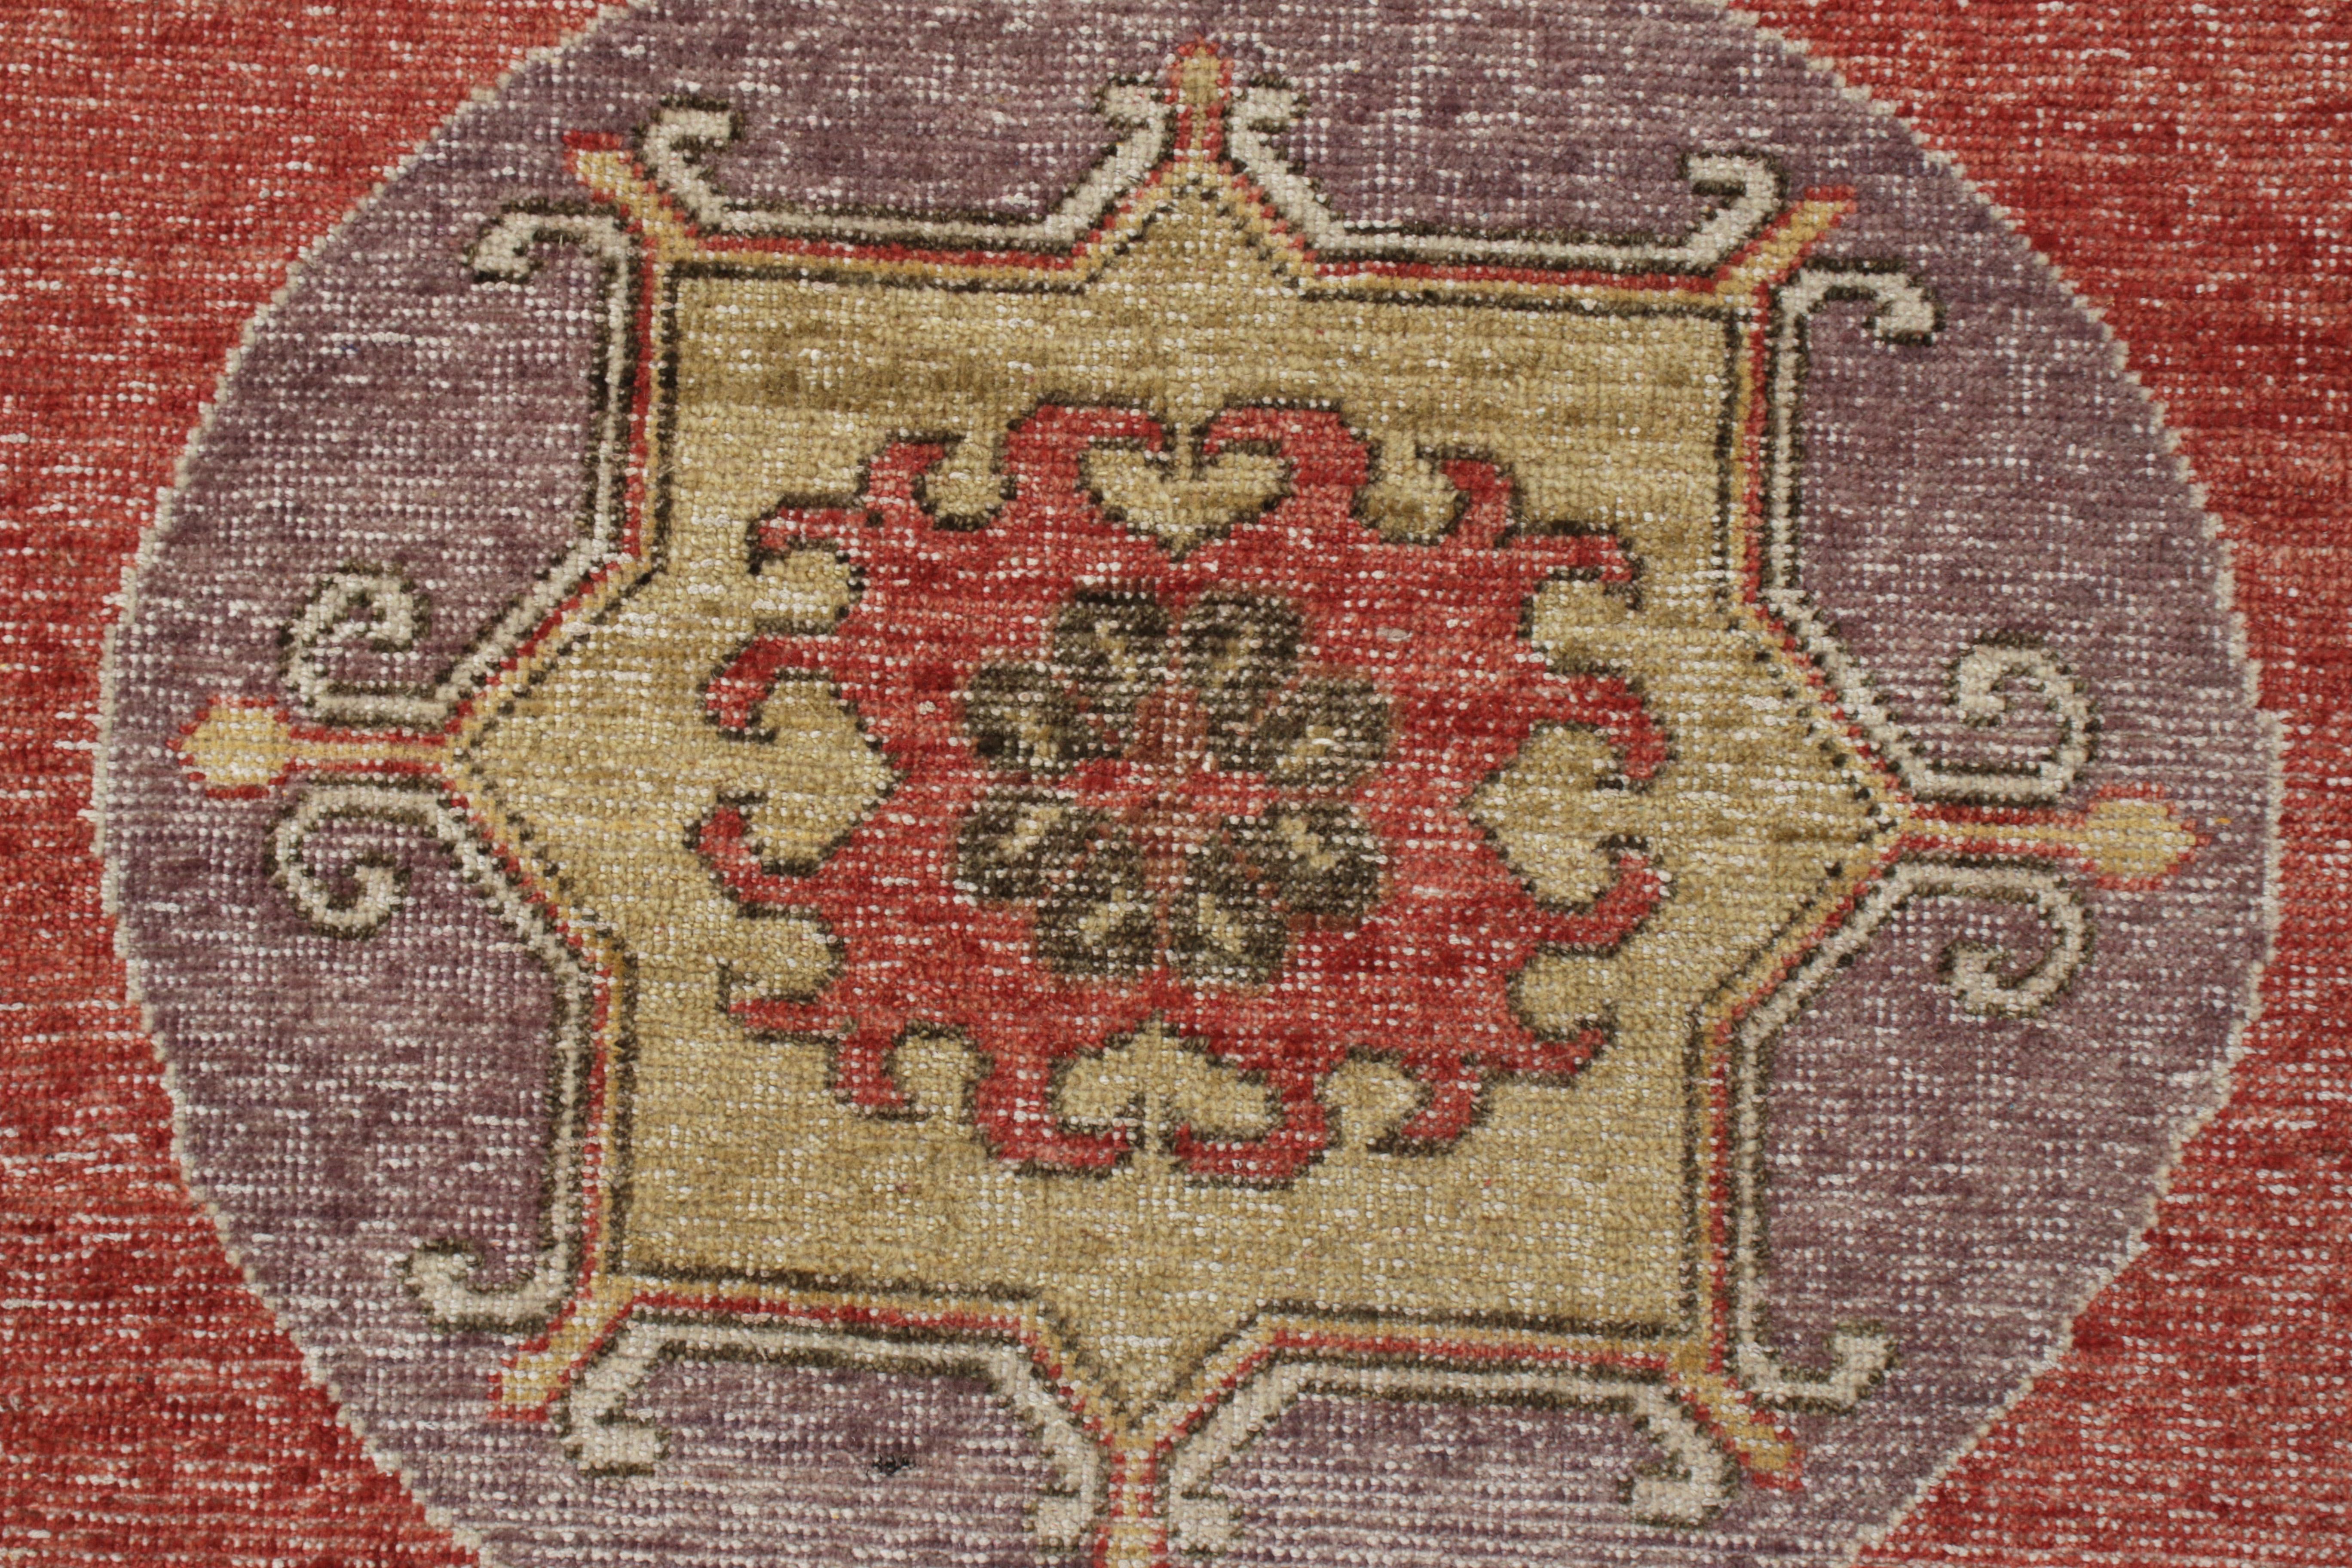 Hand-Knotted Rug & Kilim’s Distressed Khotan Style Rug in Red, Beige-Brown Medallion Pattern For Sale